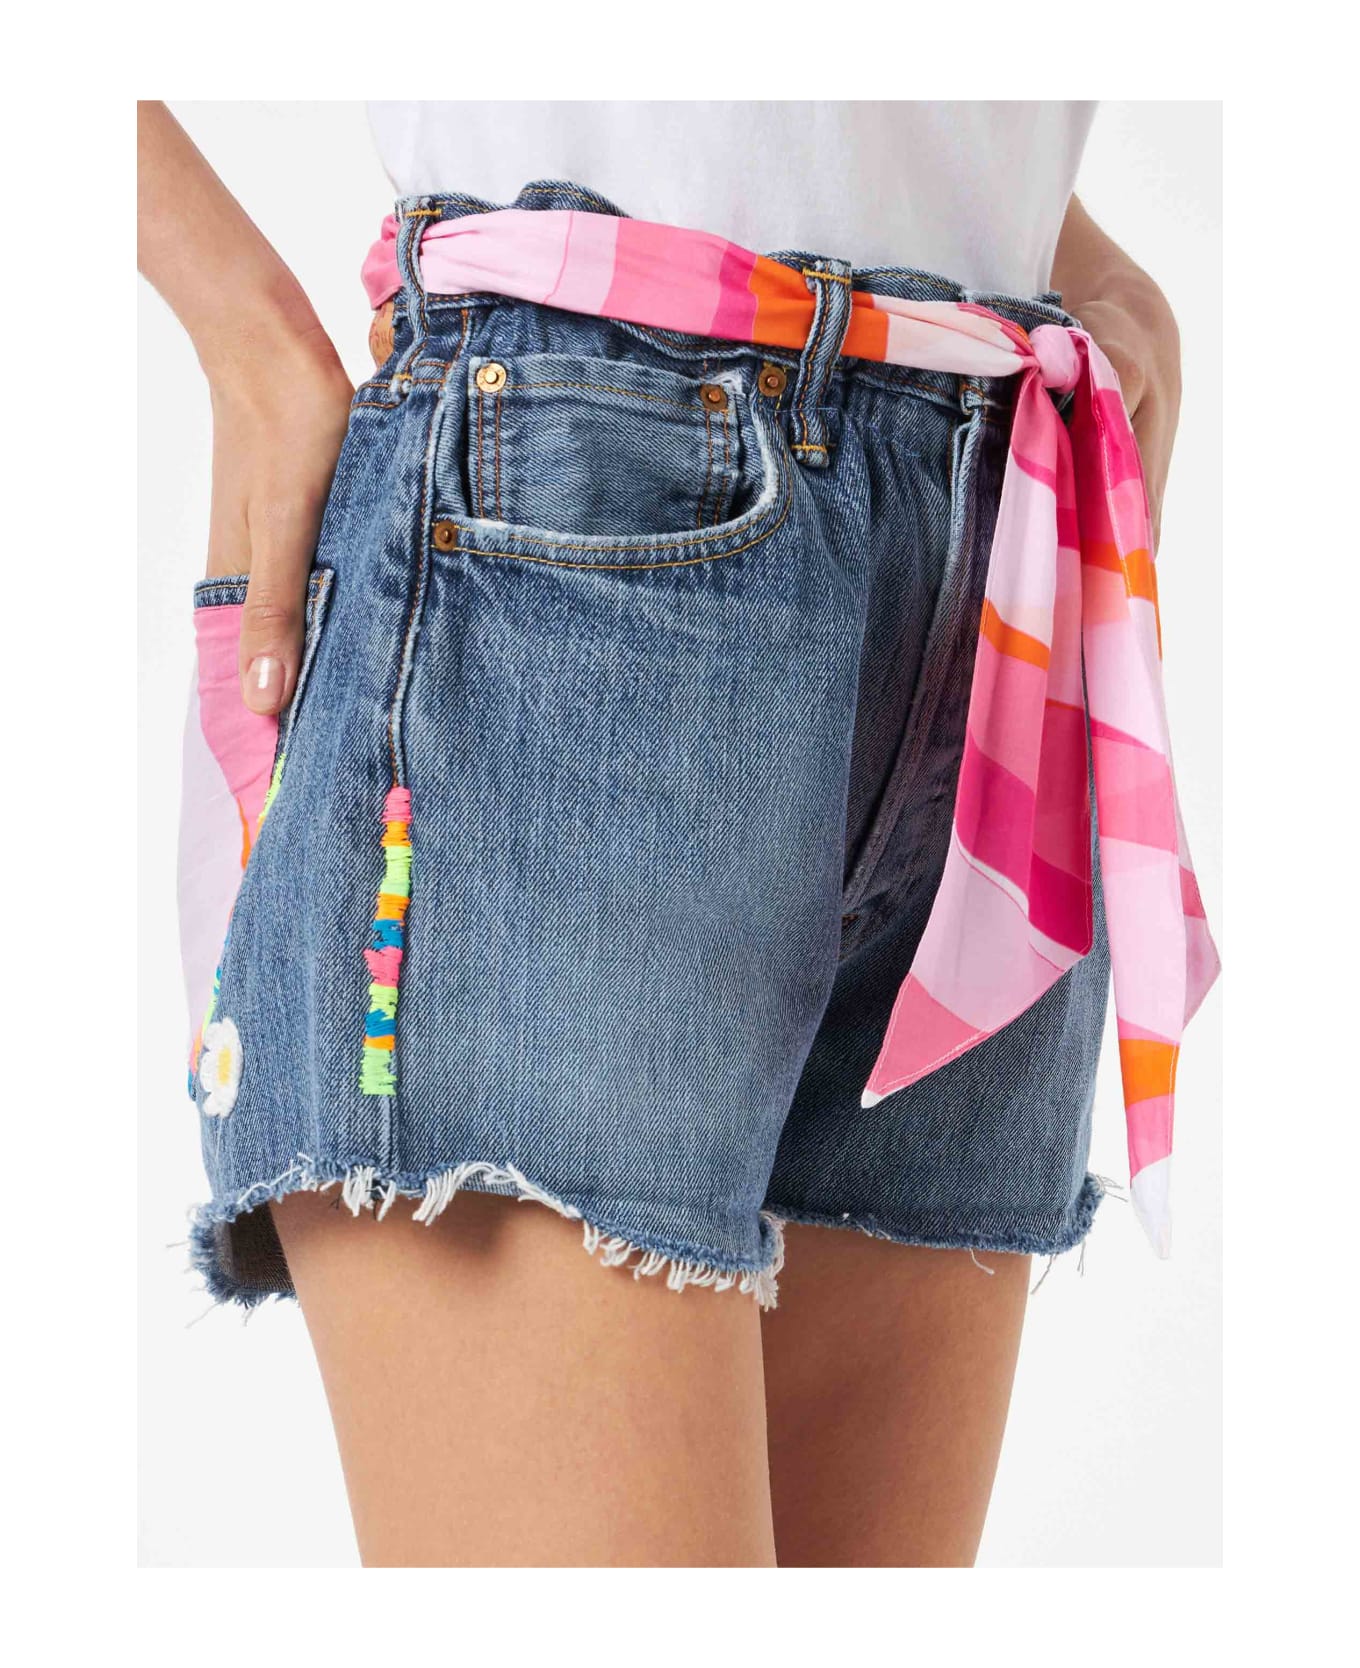 MC2 Saint Barth Woman Upcycled Denim Shorts With Embroidery - PINK